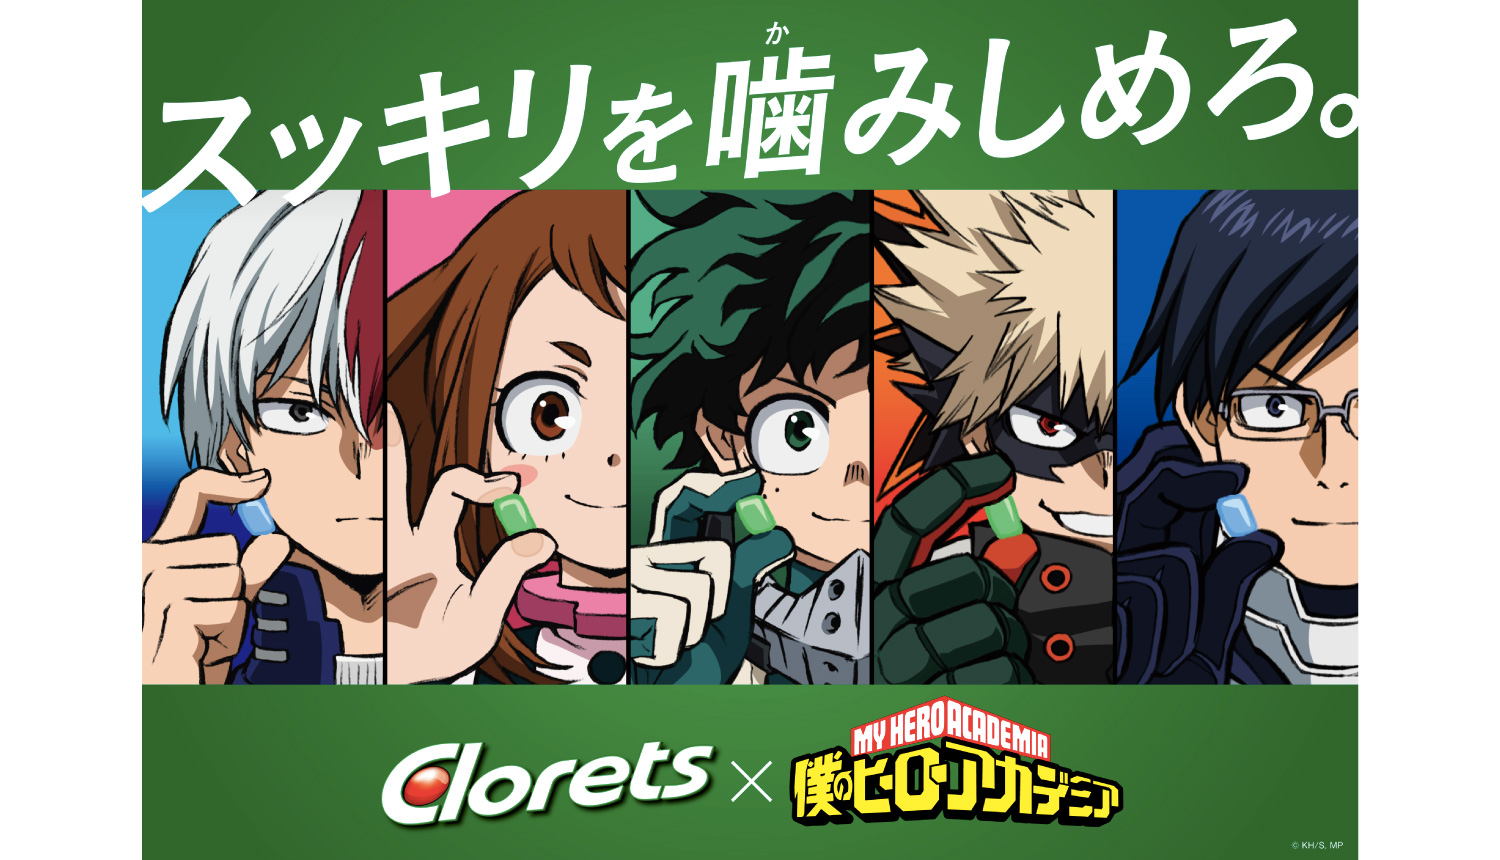 My Hero Academia Glasses Developed In Collaboration With Jins Dropping On December 12 Moshi Moshi Nippon もしもしにっぽん